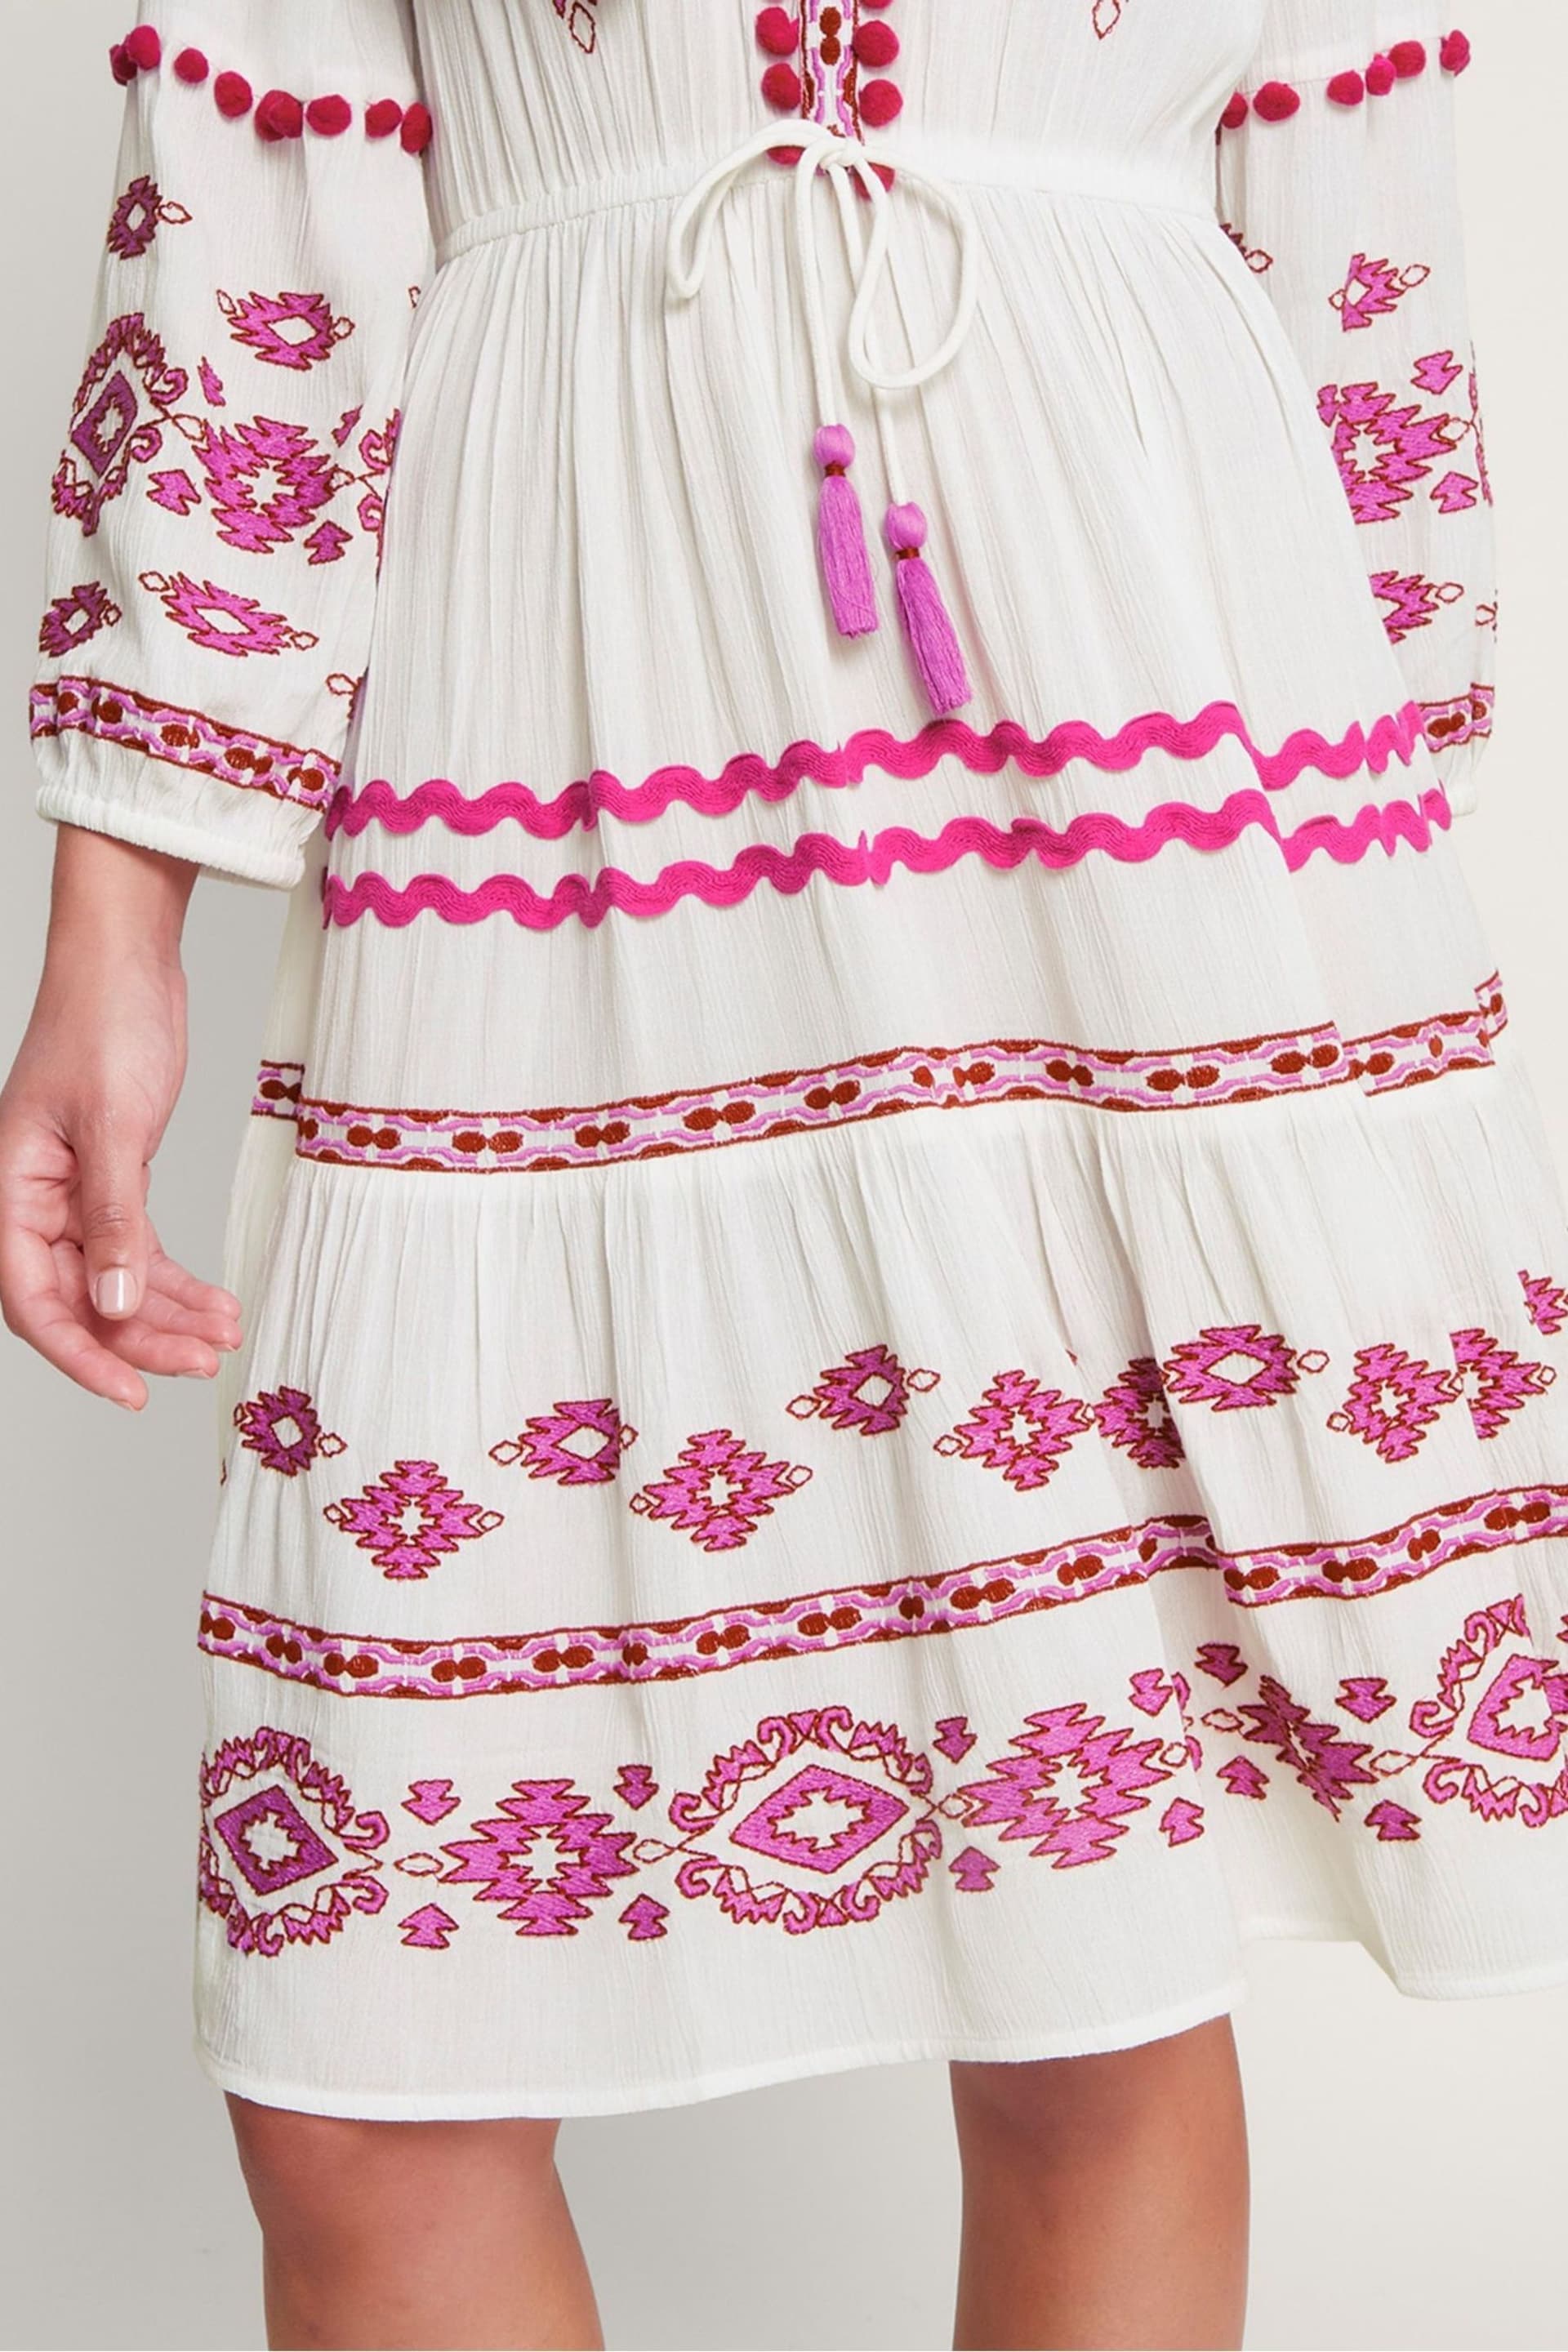 Monsoon White Embroidered Catia Dresses - Image 4 of 5